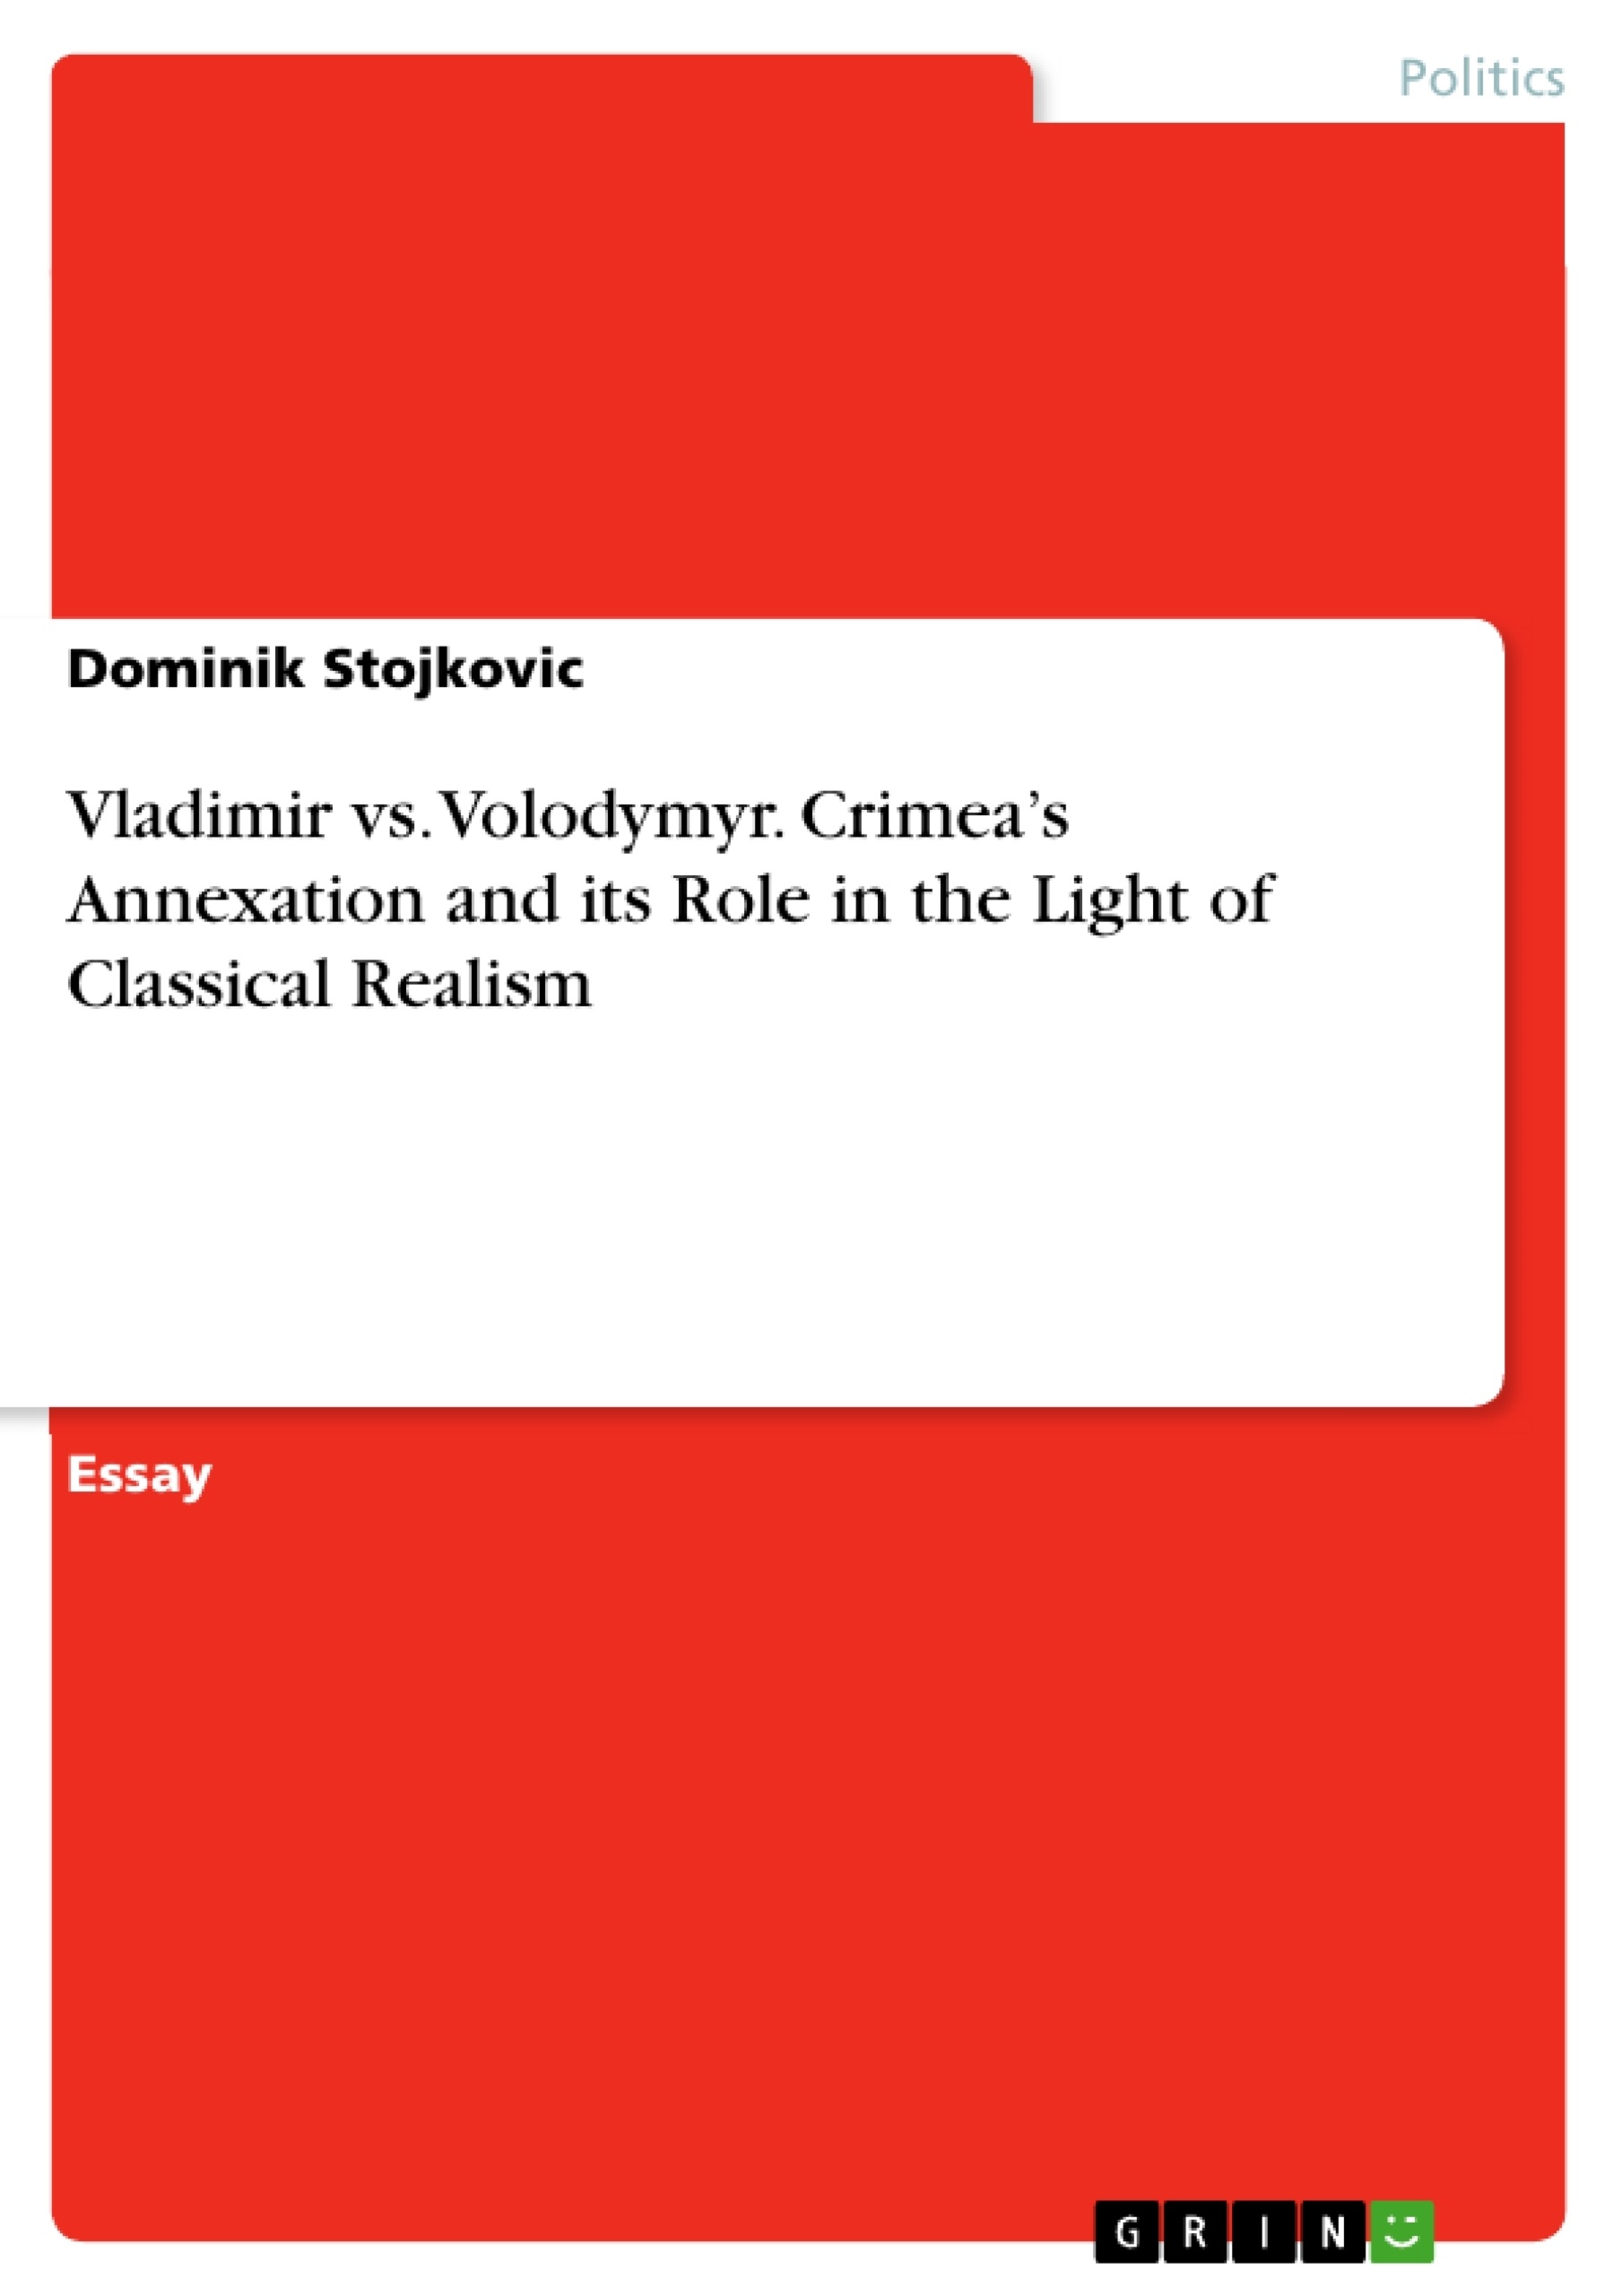 Titre: Vladimir vs. Volodymyr. Crimea’s Annexation and its Role in the Light of Classical Realism